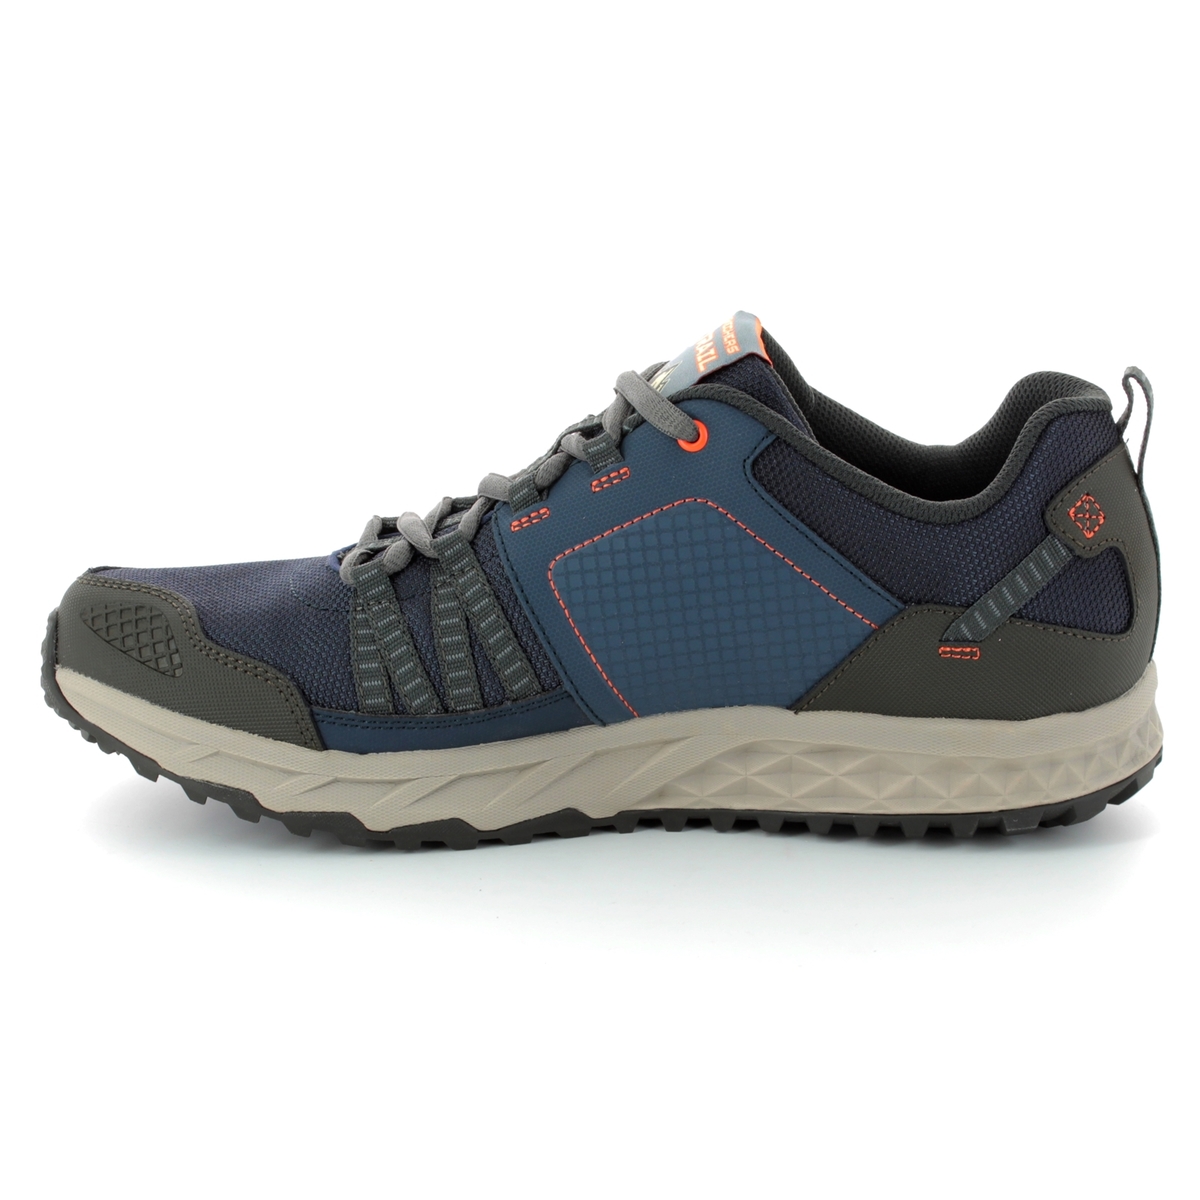 Skechers Escape Plan 51591 NVY Navy casual shoes